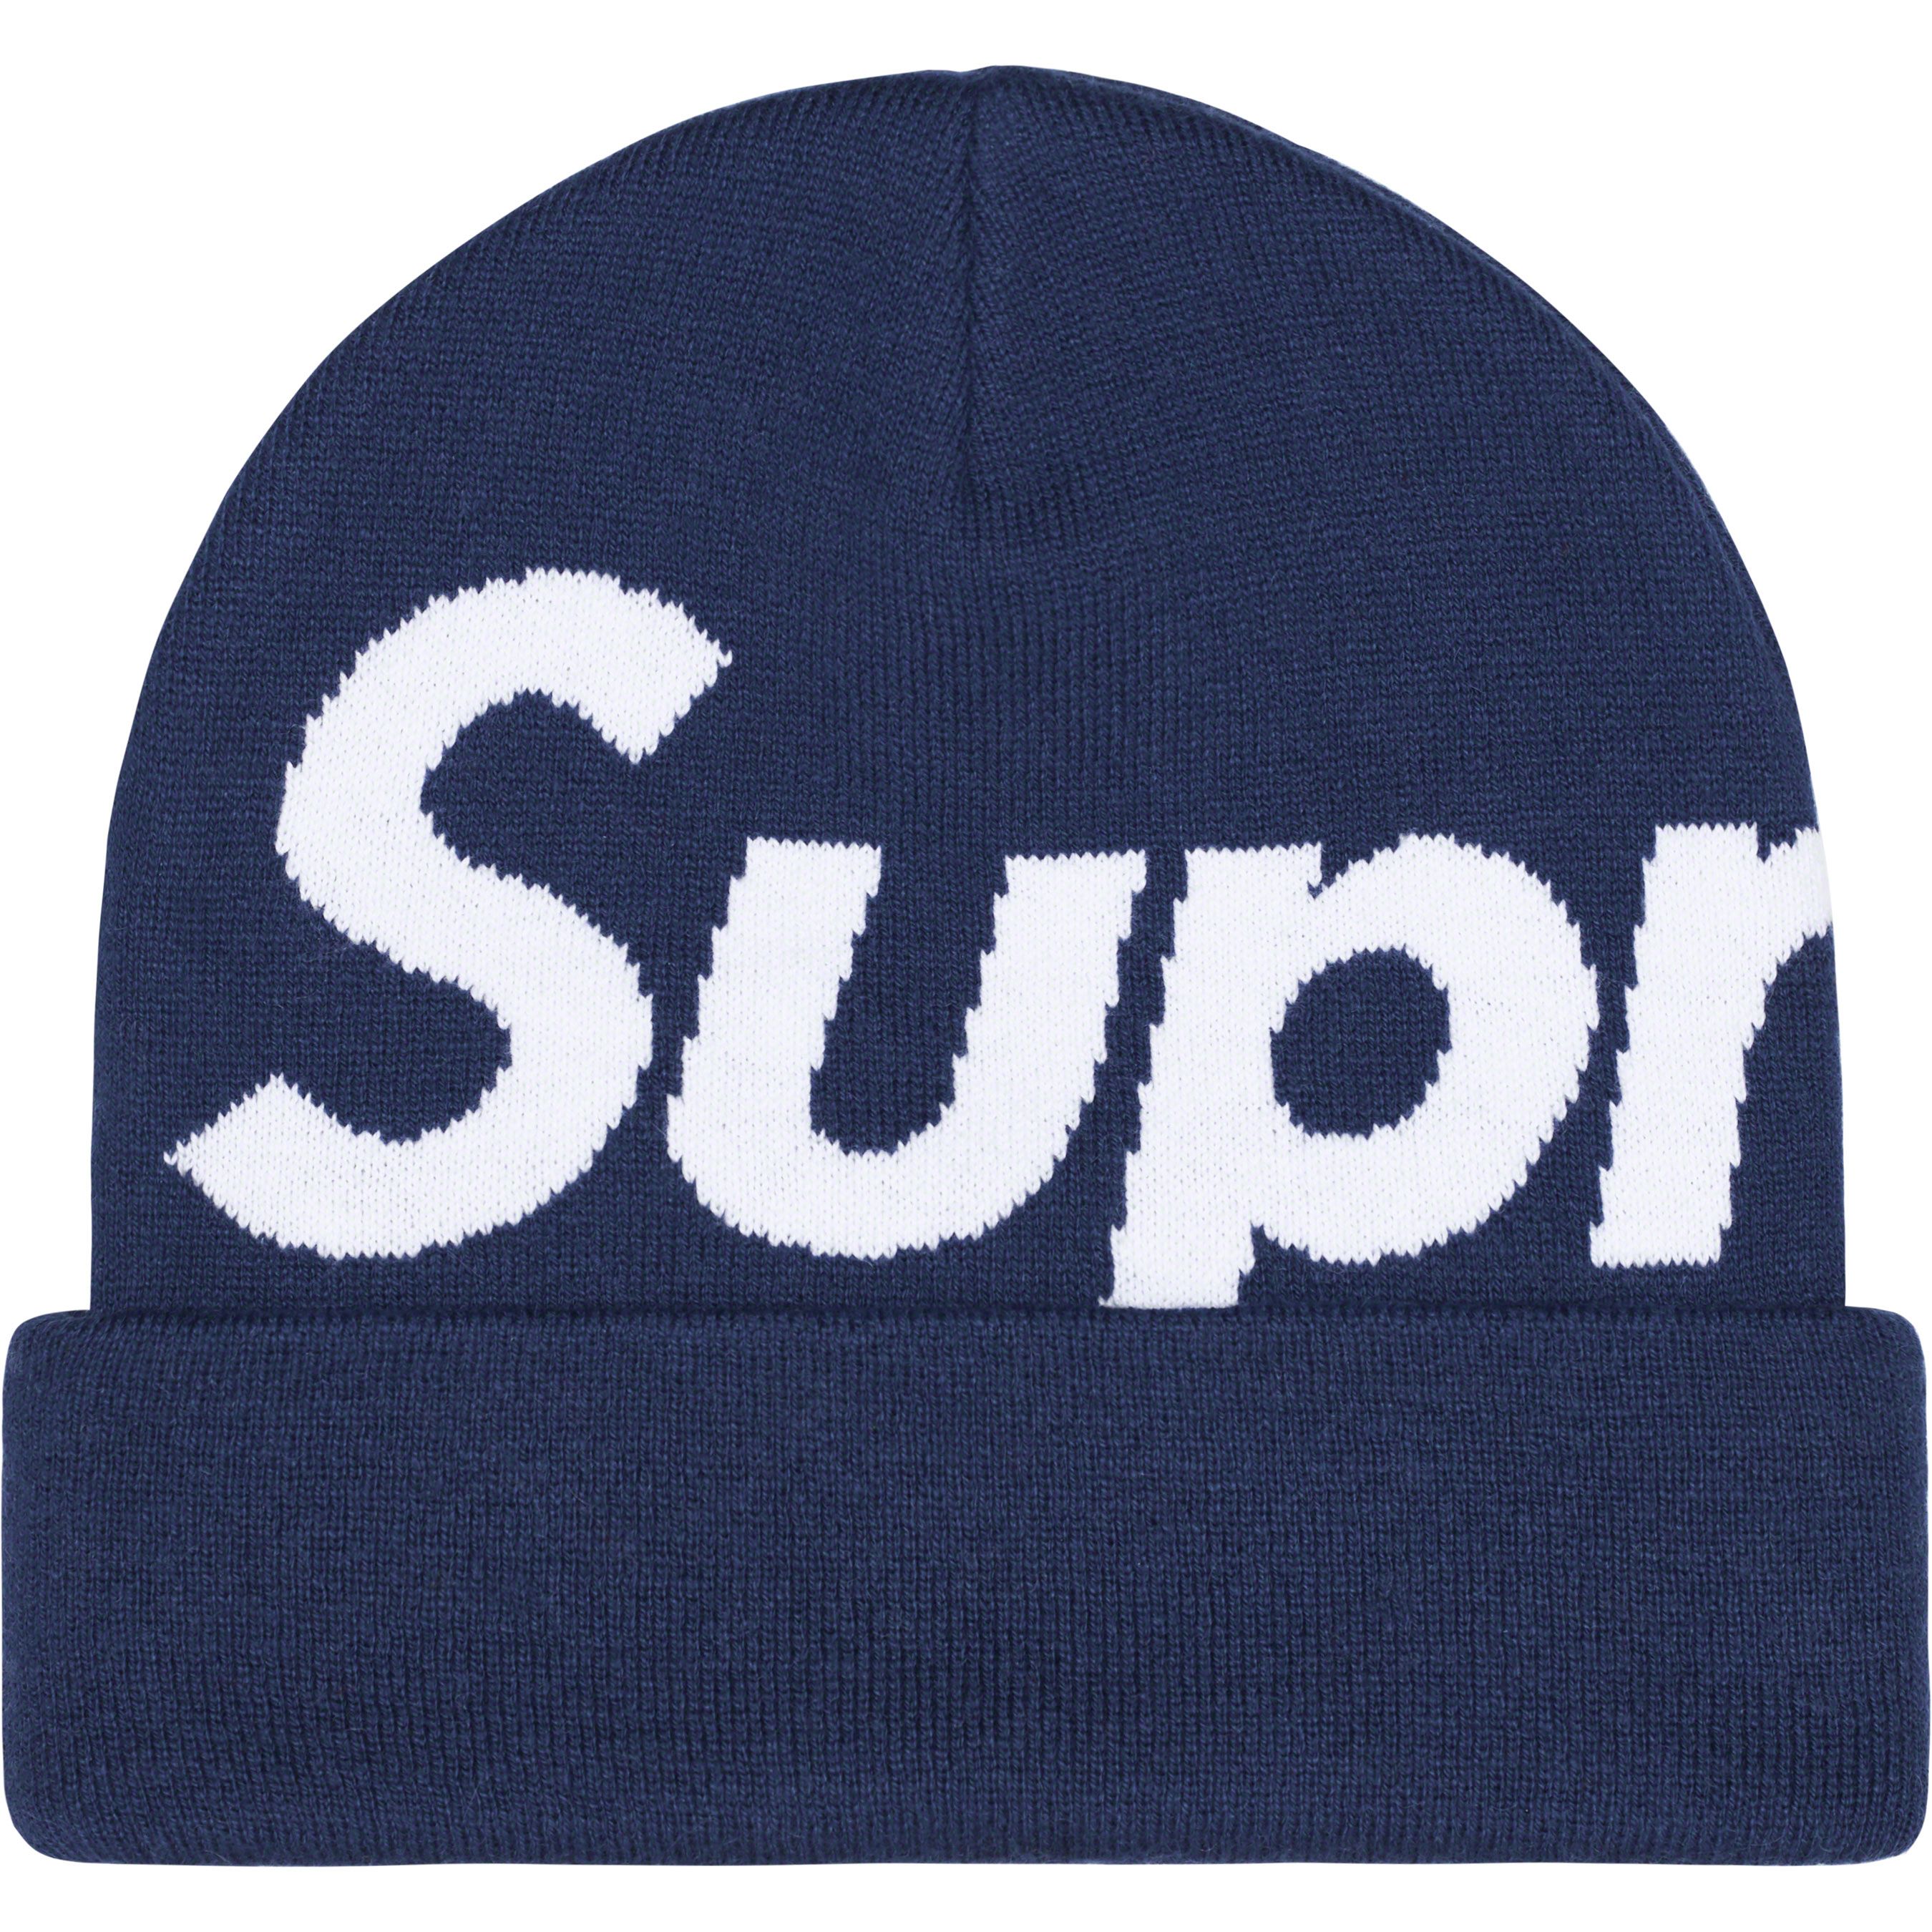 Loose Gauge Beanie - Fall/Winter 2023 Preview – Supreme